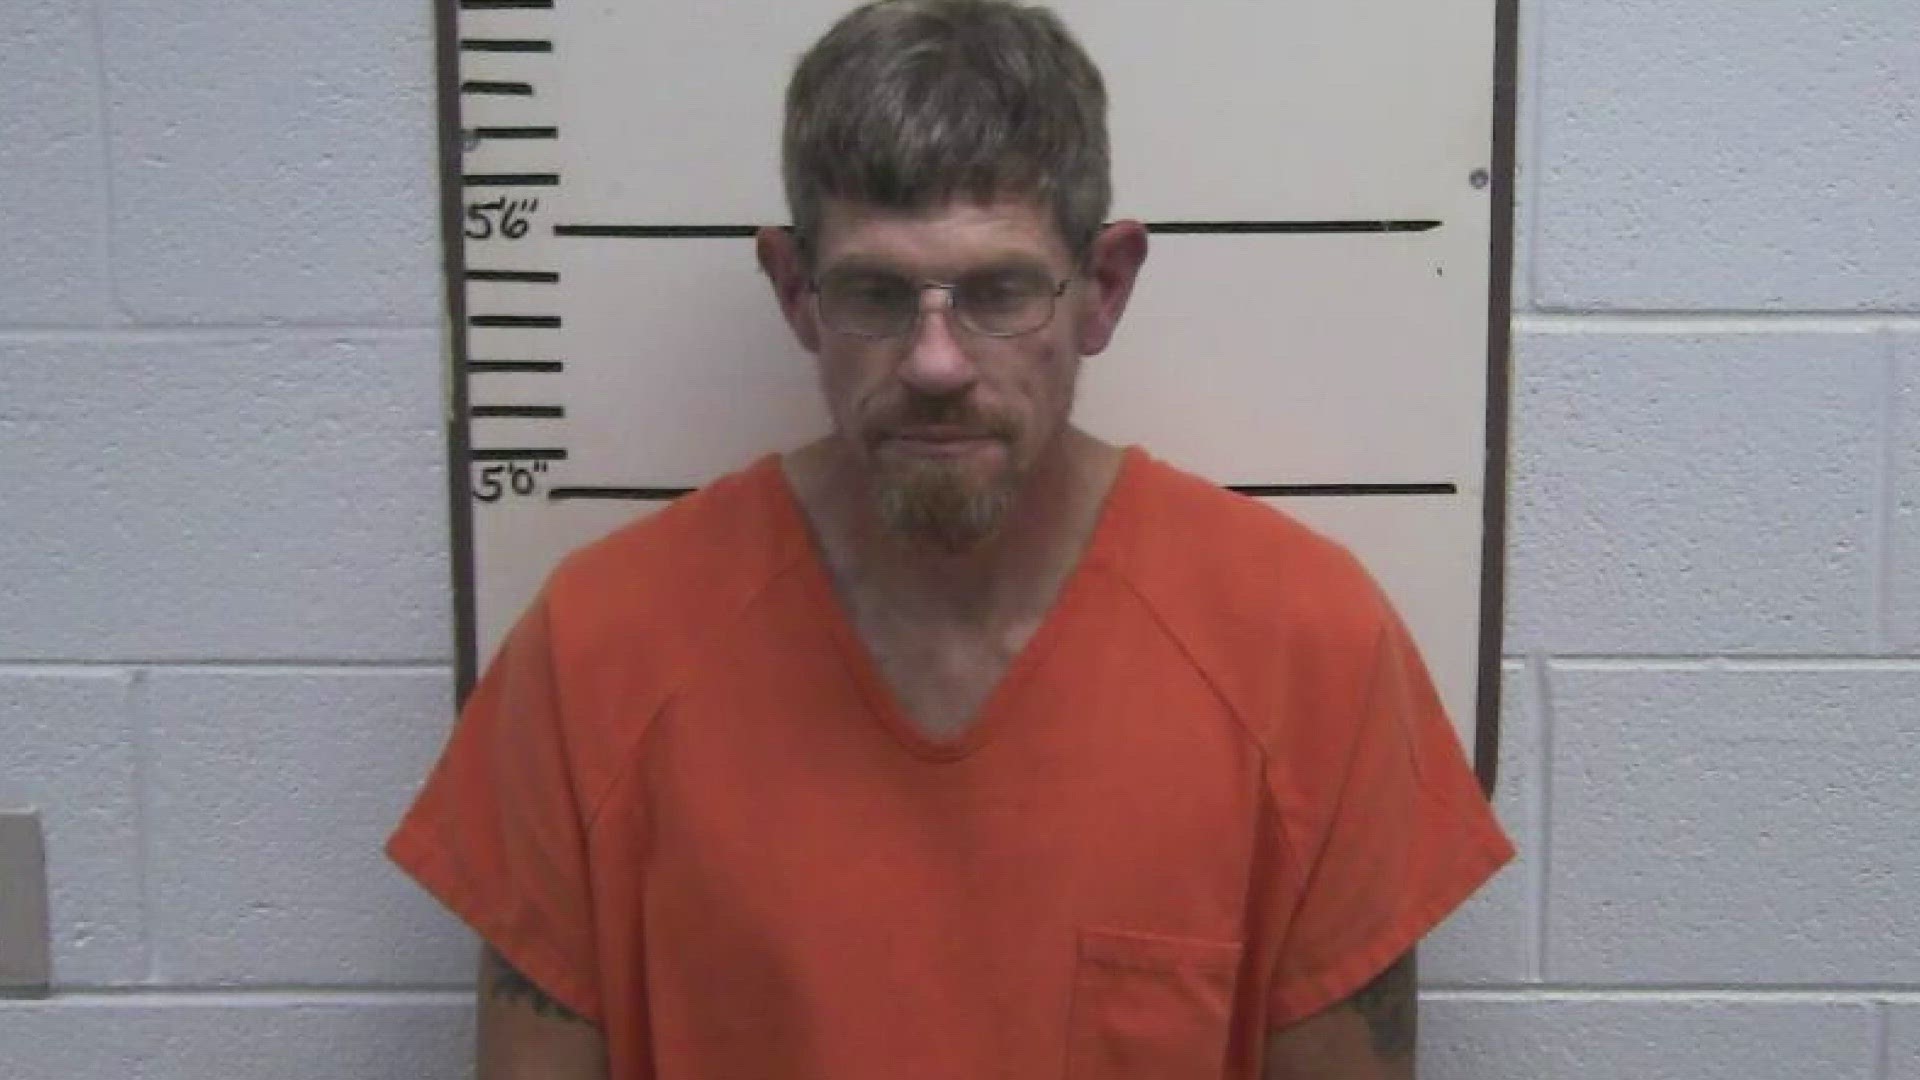 51-year-old Floyd Allen Dalton Jr allegedly hit a police vehicle, which started the high speed pursuit in Wartburg on Thursday night.